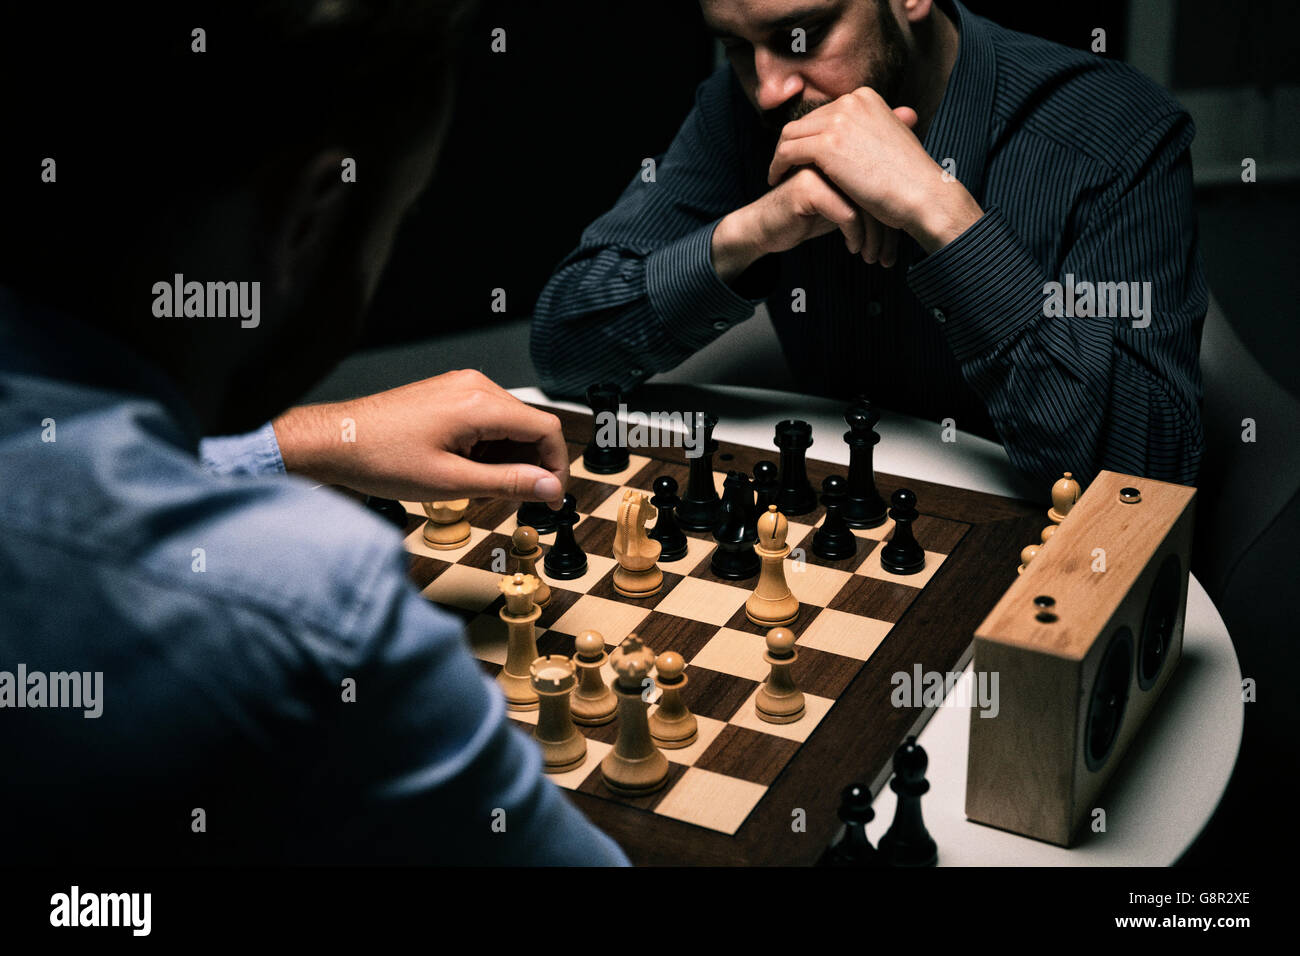 Chess board and pieces. Stock Photo